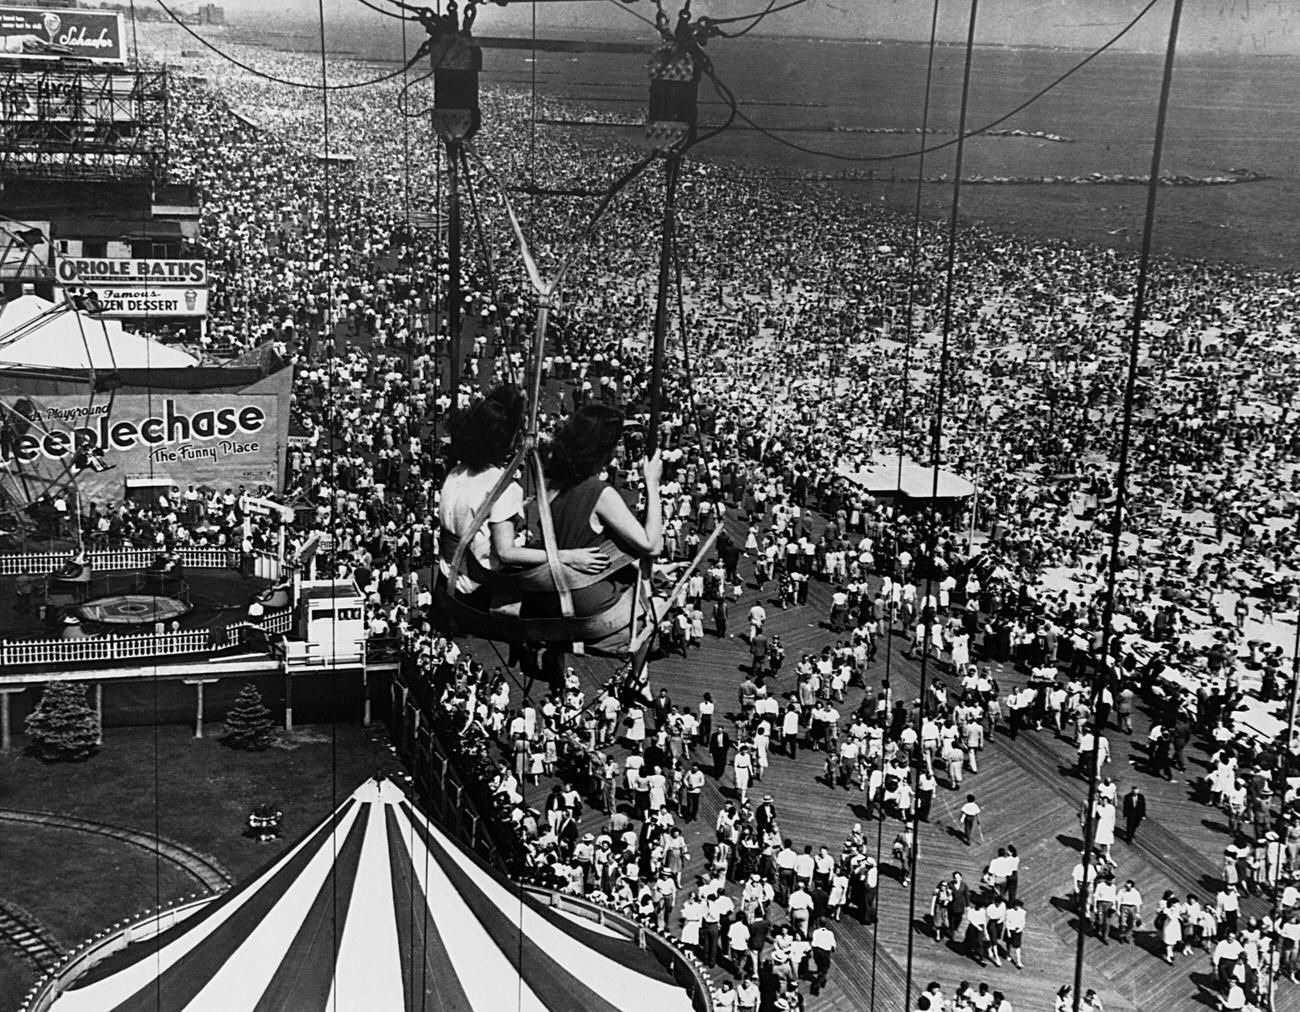 Sea Of People On Coney Island Beach: View From Parachute Jump Ride, 1950.